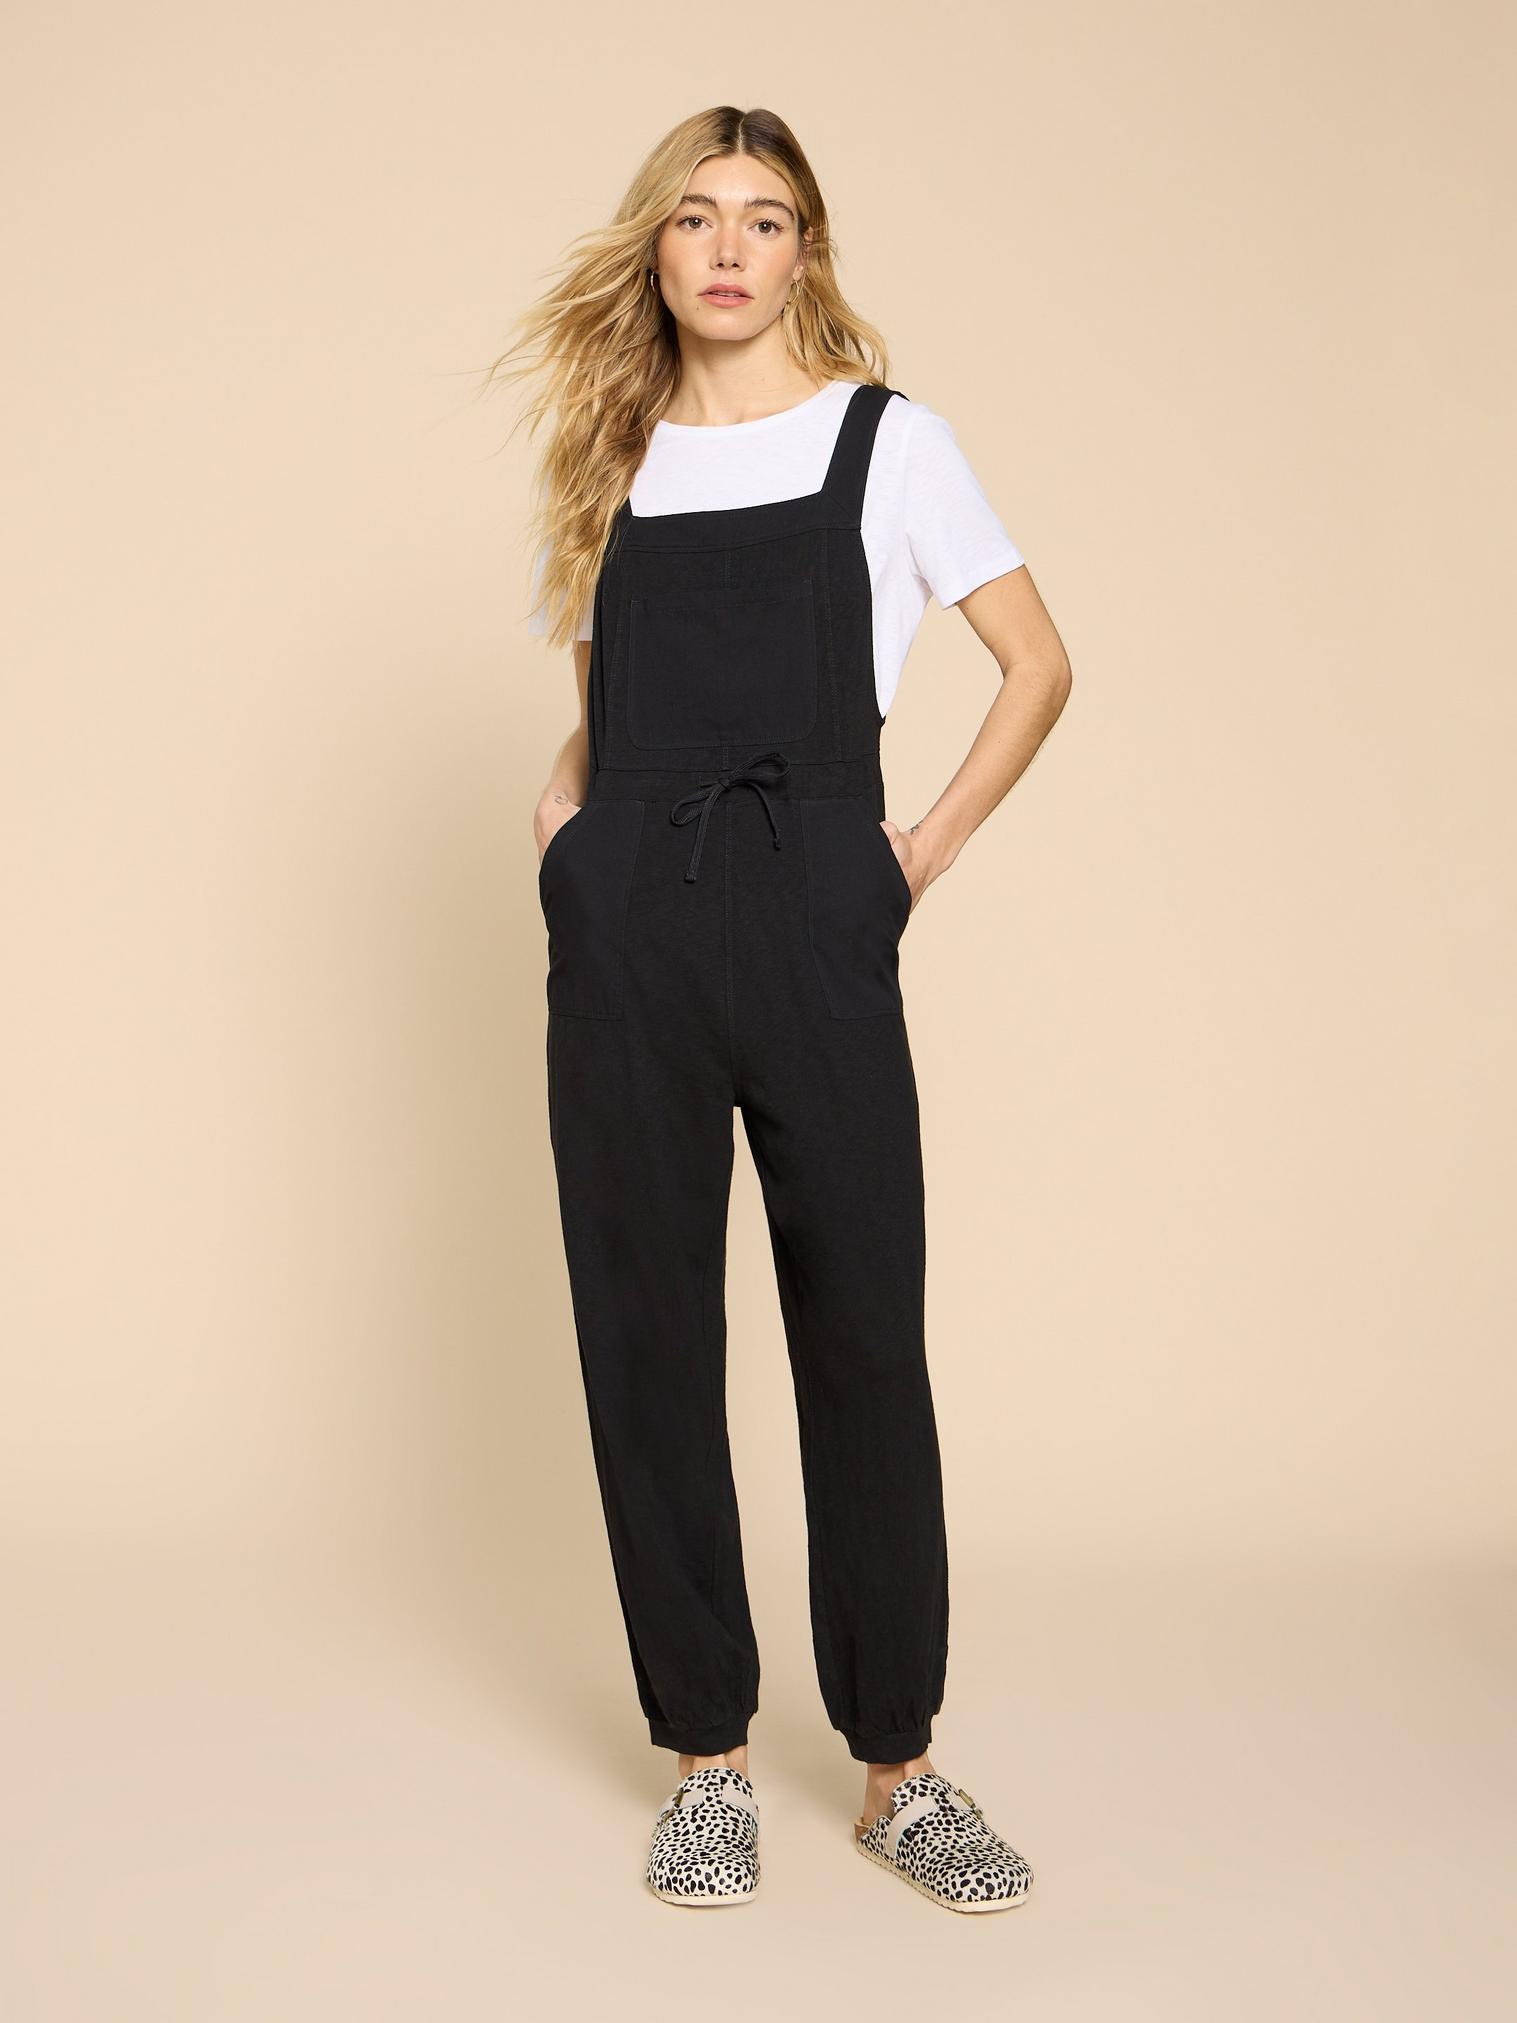 White Stuff Daphne Dungaree French Navy : 06 - the Old Byre Showroom